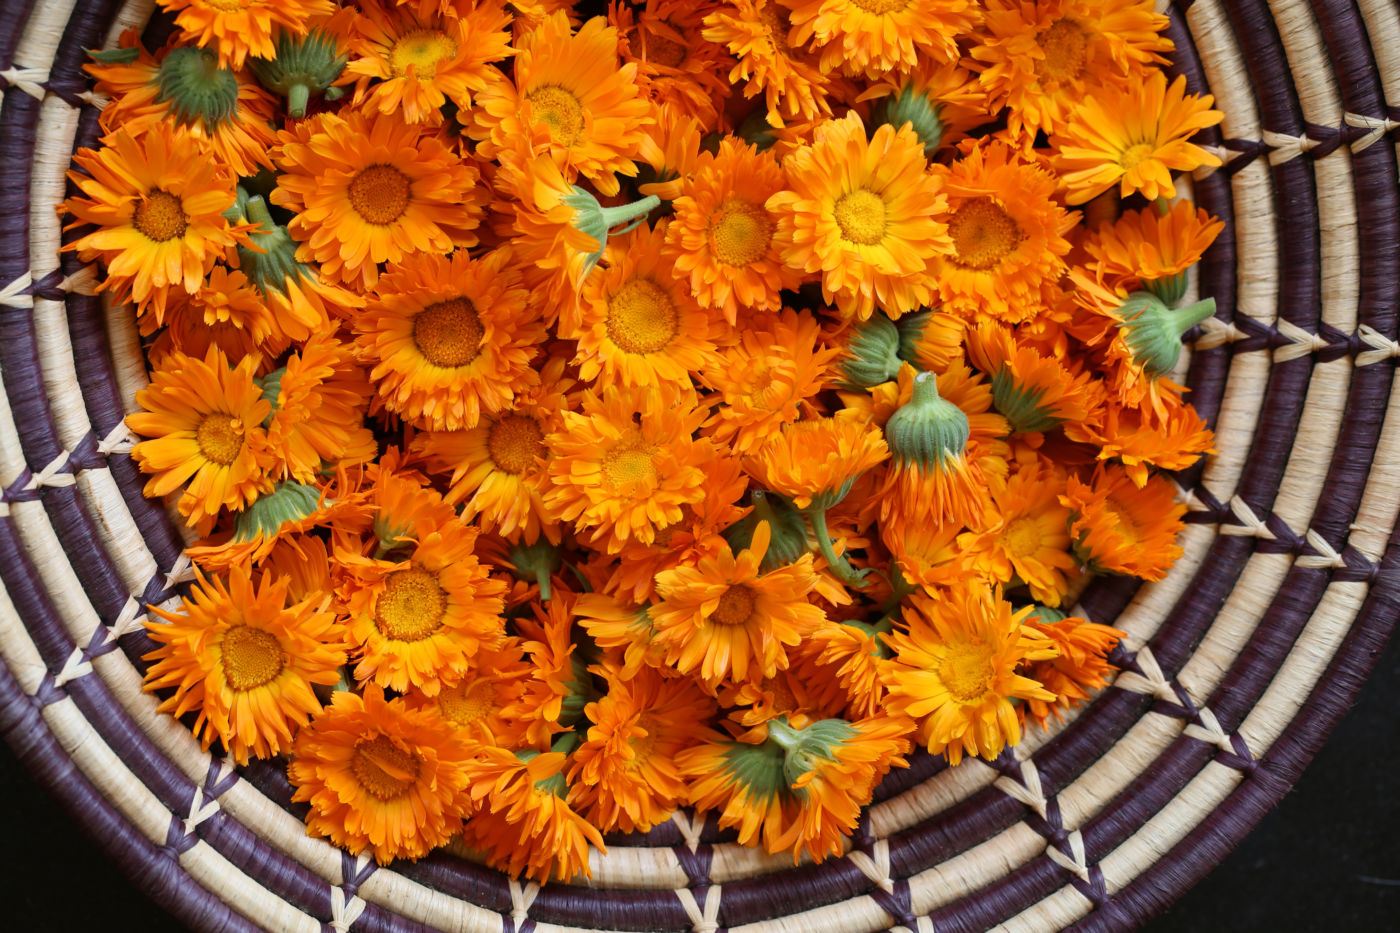 Calendula is one of 10 best herbs to start your home herbal apothecary.